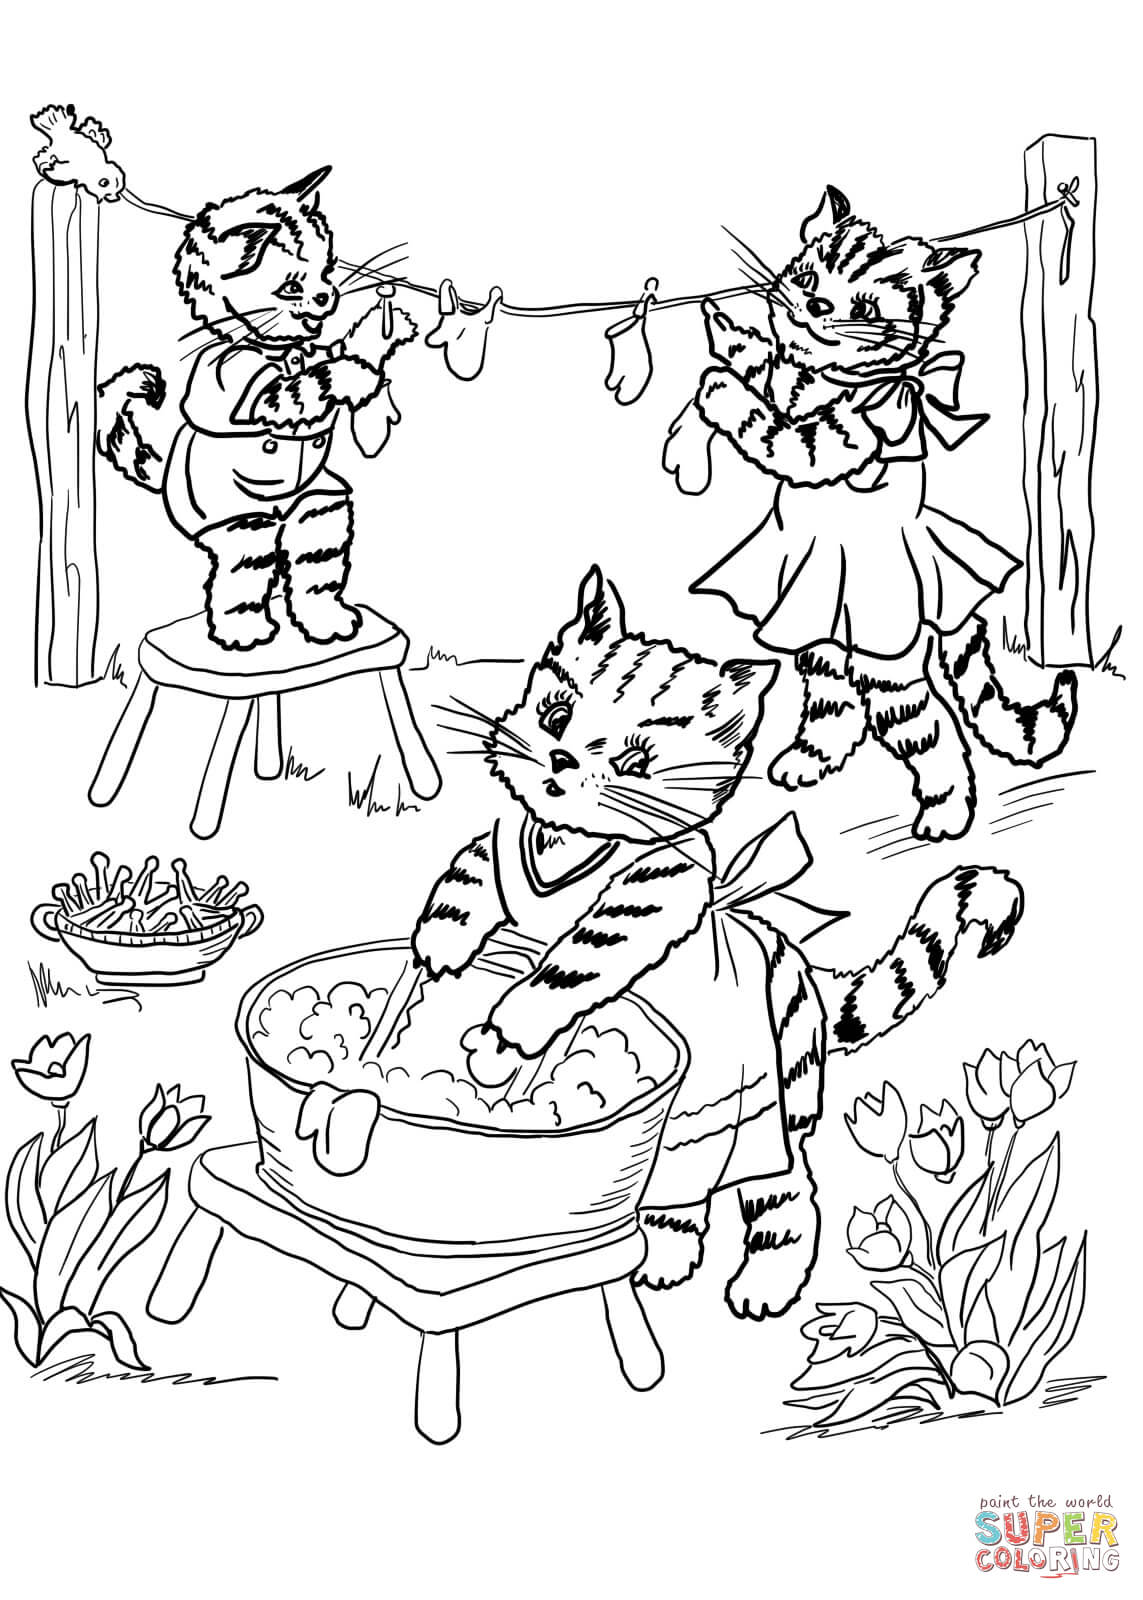 three-little-kittens-coloring-page-coloring-home